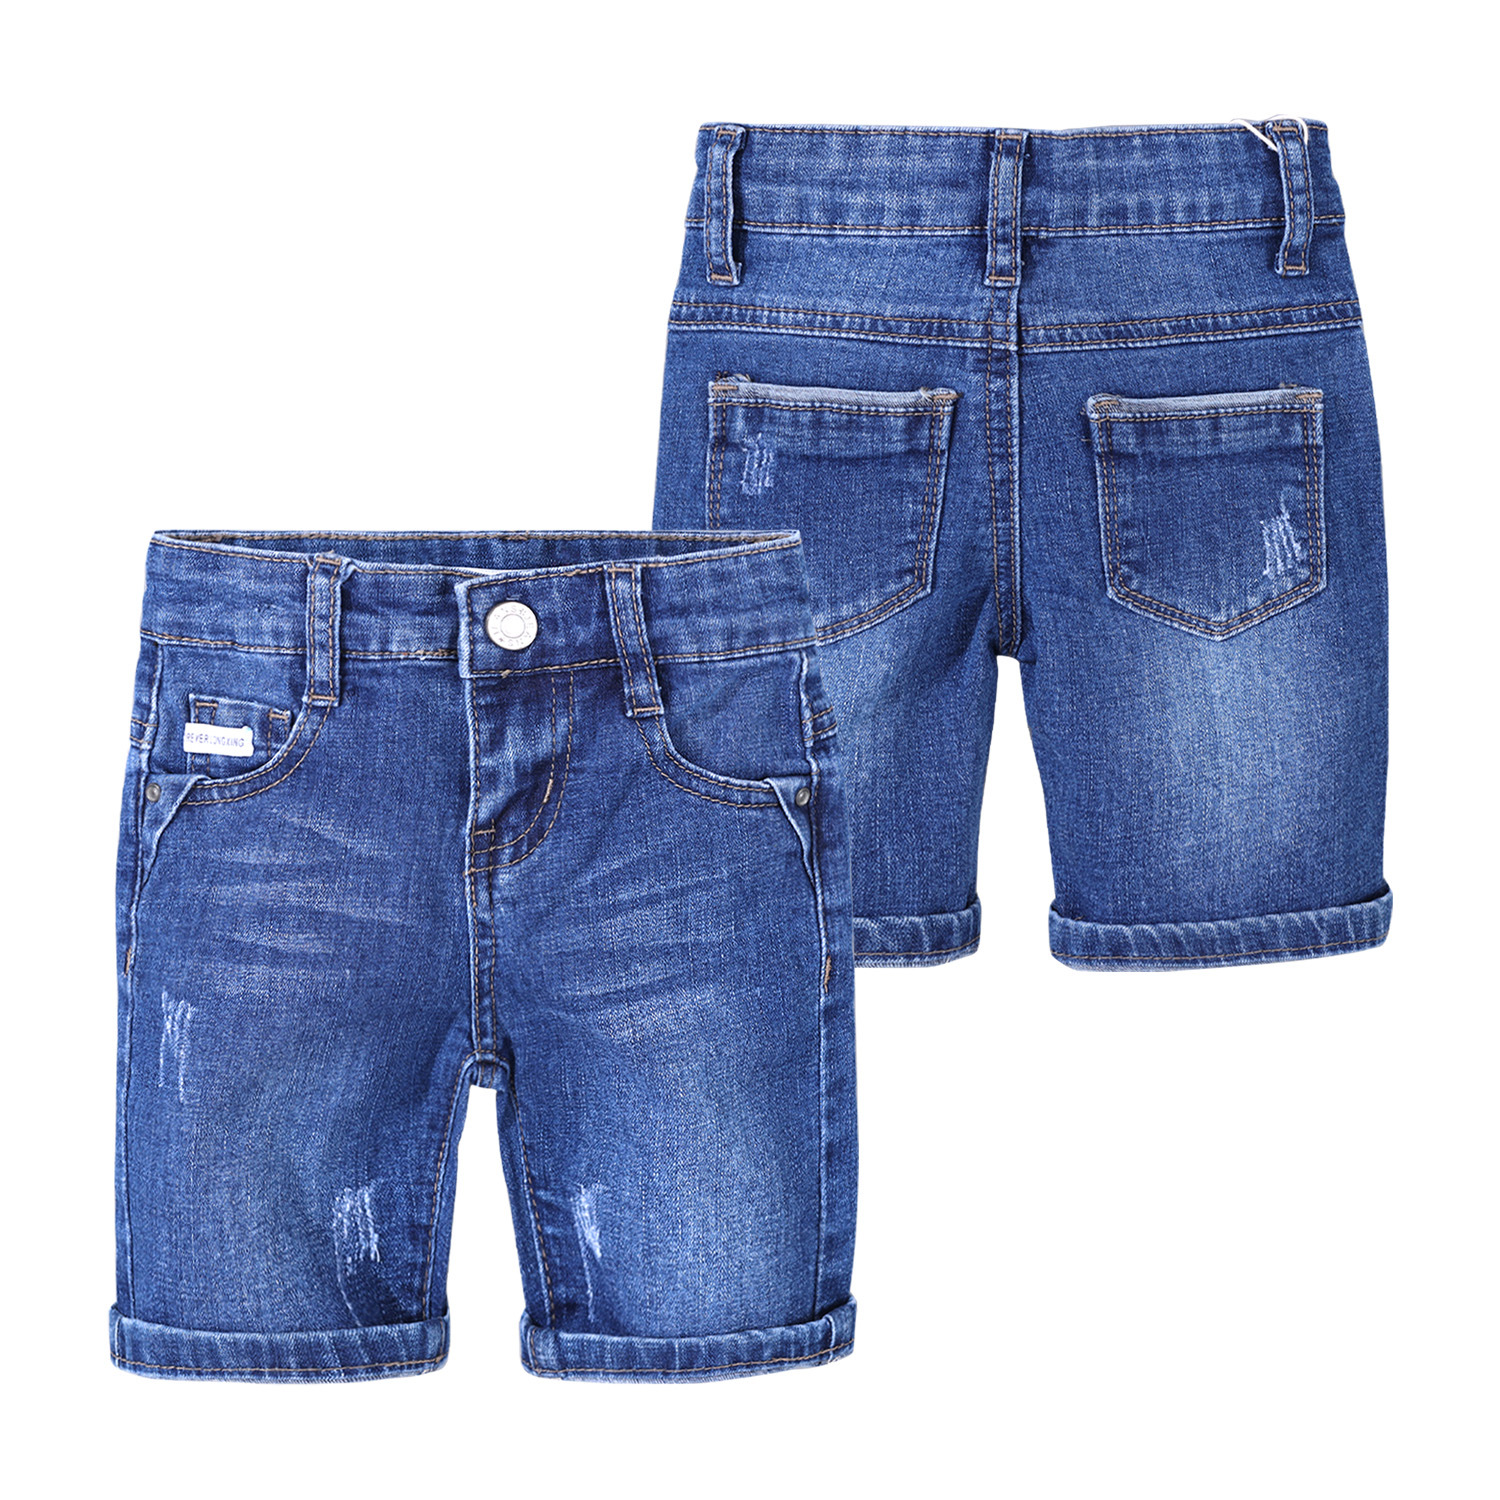 Foreign trade children's clothing shorts...